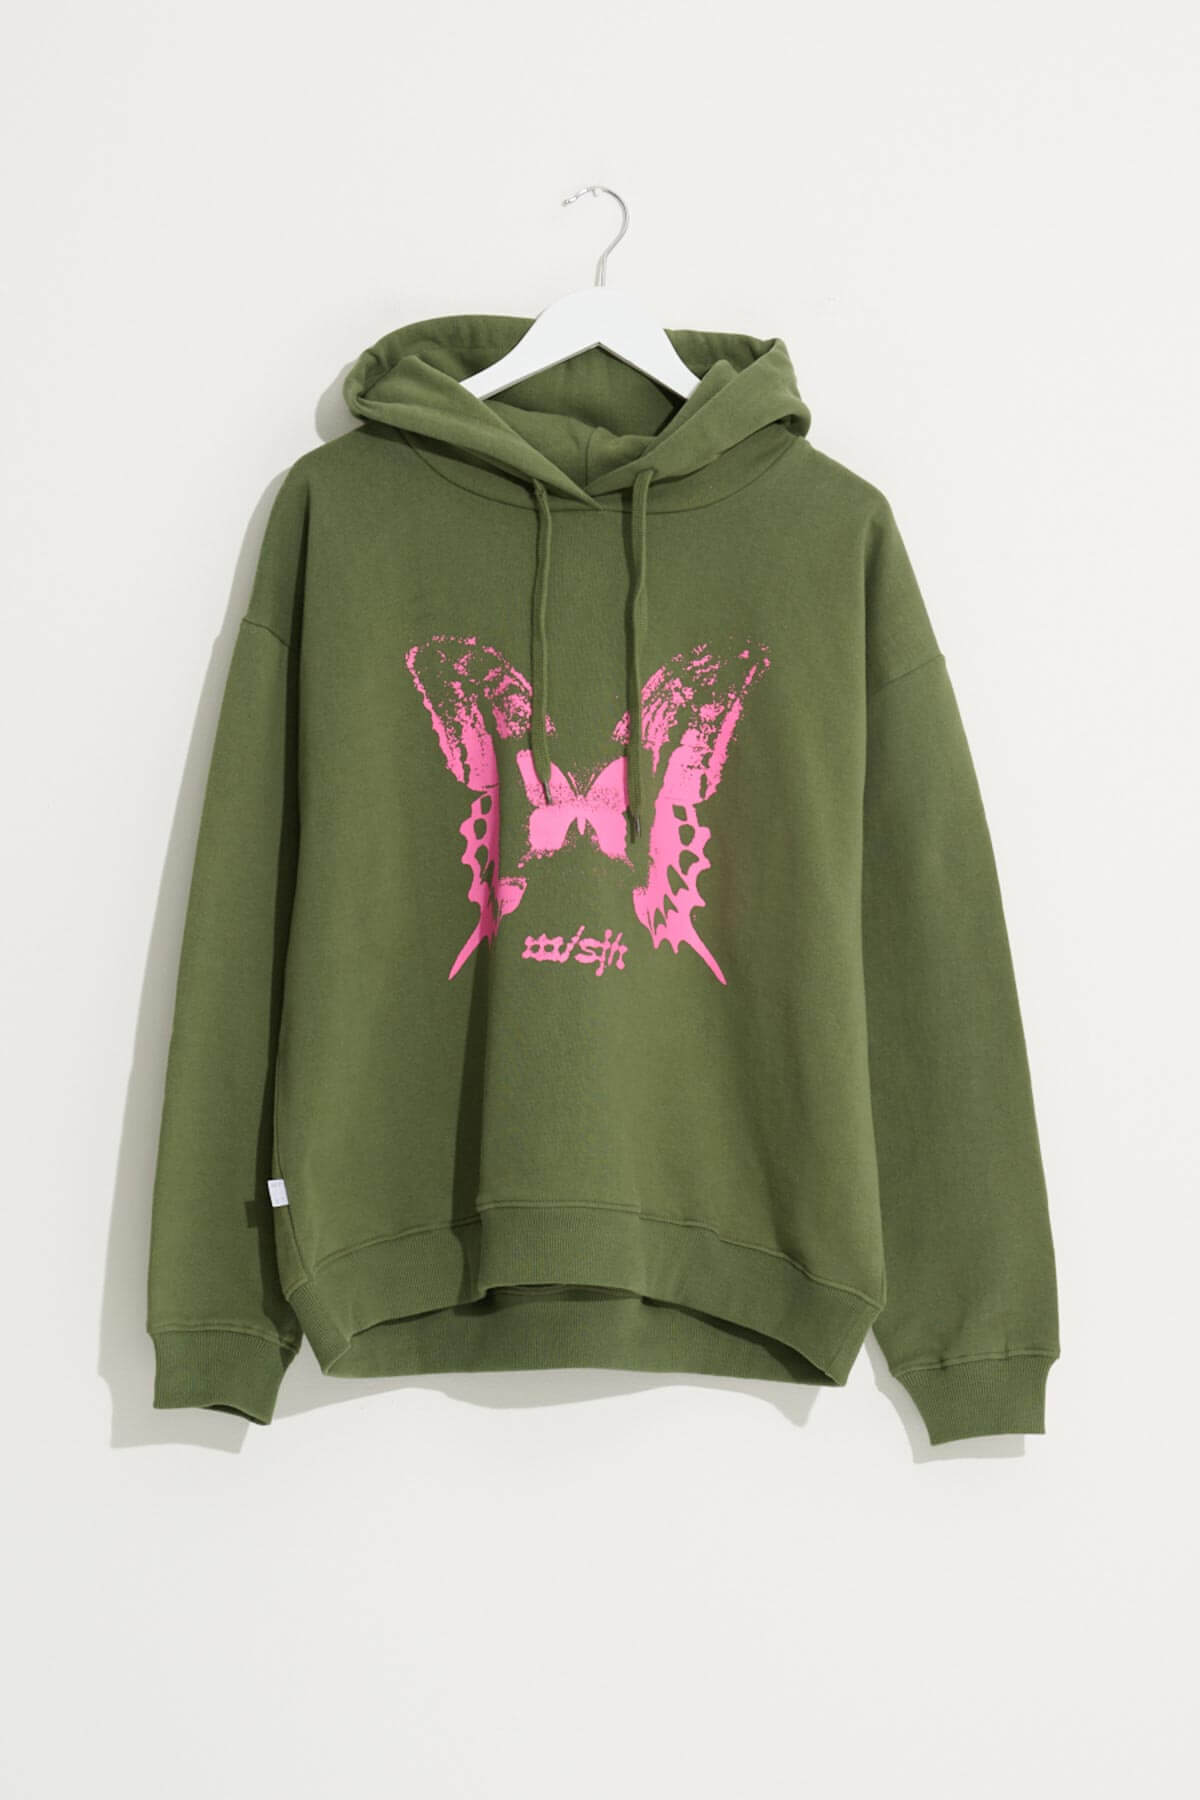 Misfit Shapes - Dream Less OS Hood - Army Green